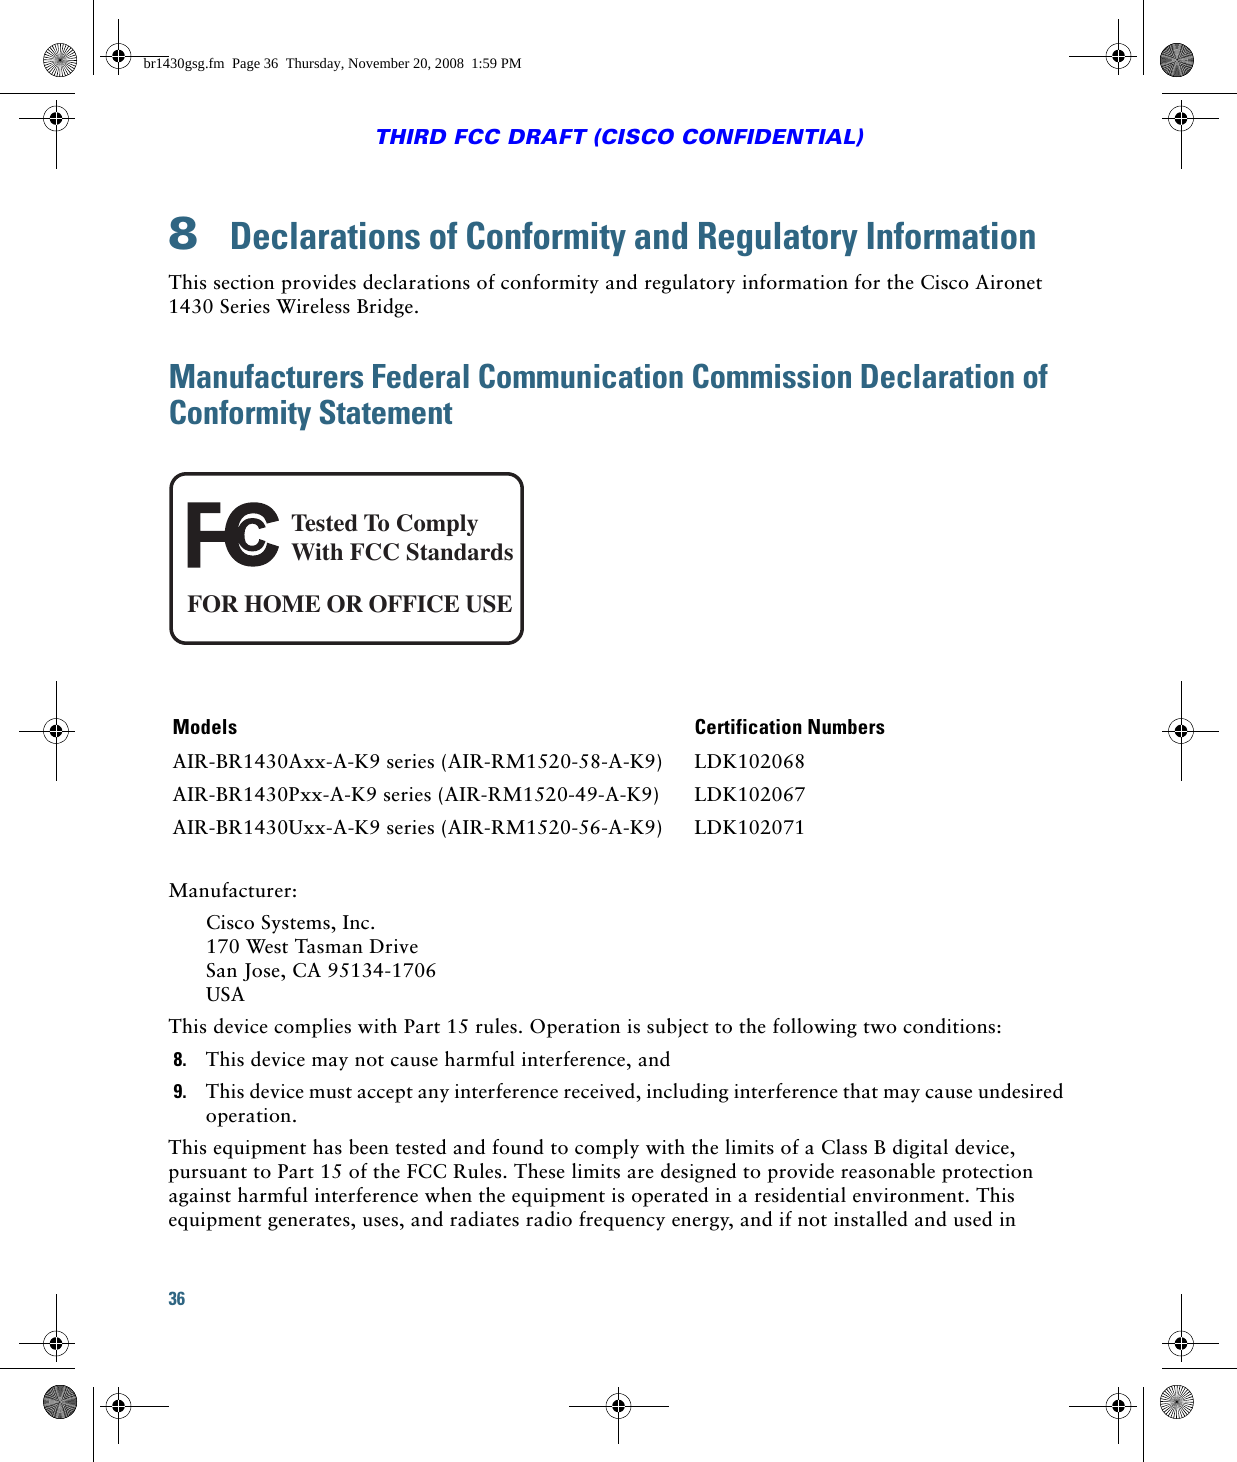 36THIRD FCC DRAFT (CISCO CONFIDENTIAL)8  Declarations of Conformity and Regulatory InformationThis section provides declarations of conformity and regulatory information for the Cisco Aironet 1430 Series Wireless Bridge.Manufacturers Federal Communication Commission Declaration of Conformity StatementManufacturer:Cisco Systems, Inc. 170 West Tasman Drive San Jose, CA 95134-1706 USAThis device complies with Part 15 rules. Operation is subject to the following two conditions:8. This device may not cause harmful interference, and9. This device must accept any interference received, including interference that may cause undesired operation.This equipment has been tested and found to comply with the limits of a Class B digital device, pursuant to Part 15 of the FCC Rules. These limits are designed to provide reasonable protection against harmful interference when the equipment is operated in a residential environment. This equipment generates, uses, and radiates radio frequency energy, and if not installed and used in Models Certification NumbersAIR-BR1430Axx-A-K9 series (AIR-RM1520-58-A-K9) LDK102068AIR-BR1430Pxx-A-K9 series (AIR-RM1520-49-A-K9) LDK102067AIR-BR1430Uxx-A-K9 series (AIR-RM1520-56-A-K9) LDK102071Tested To ComplyWith FCC StandardsFOR HOME OR OFFICE USEbr1430gsg.fm  Page 36  Thursday, November 20, 2008  1:59 PM